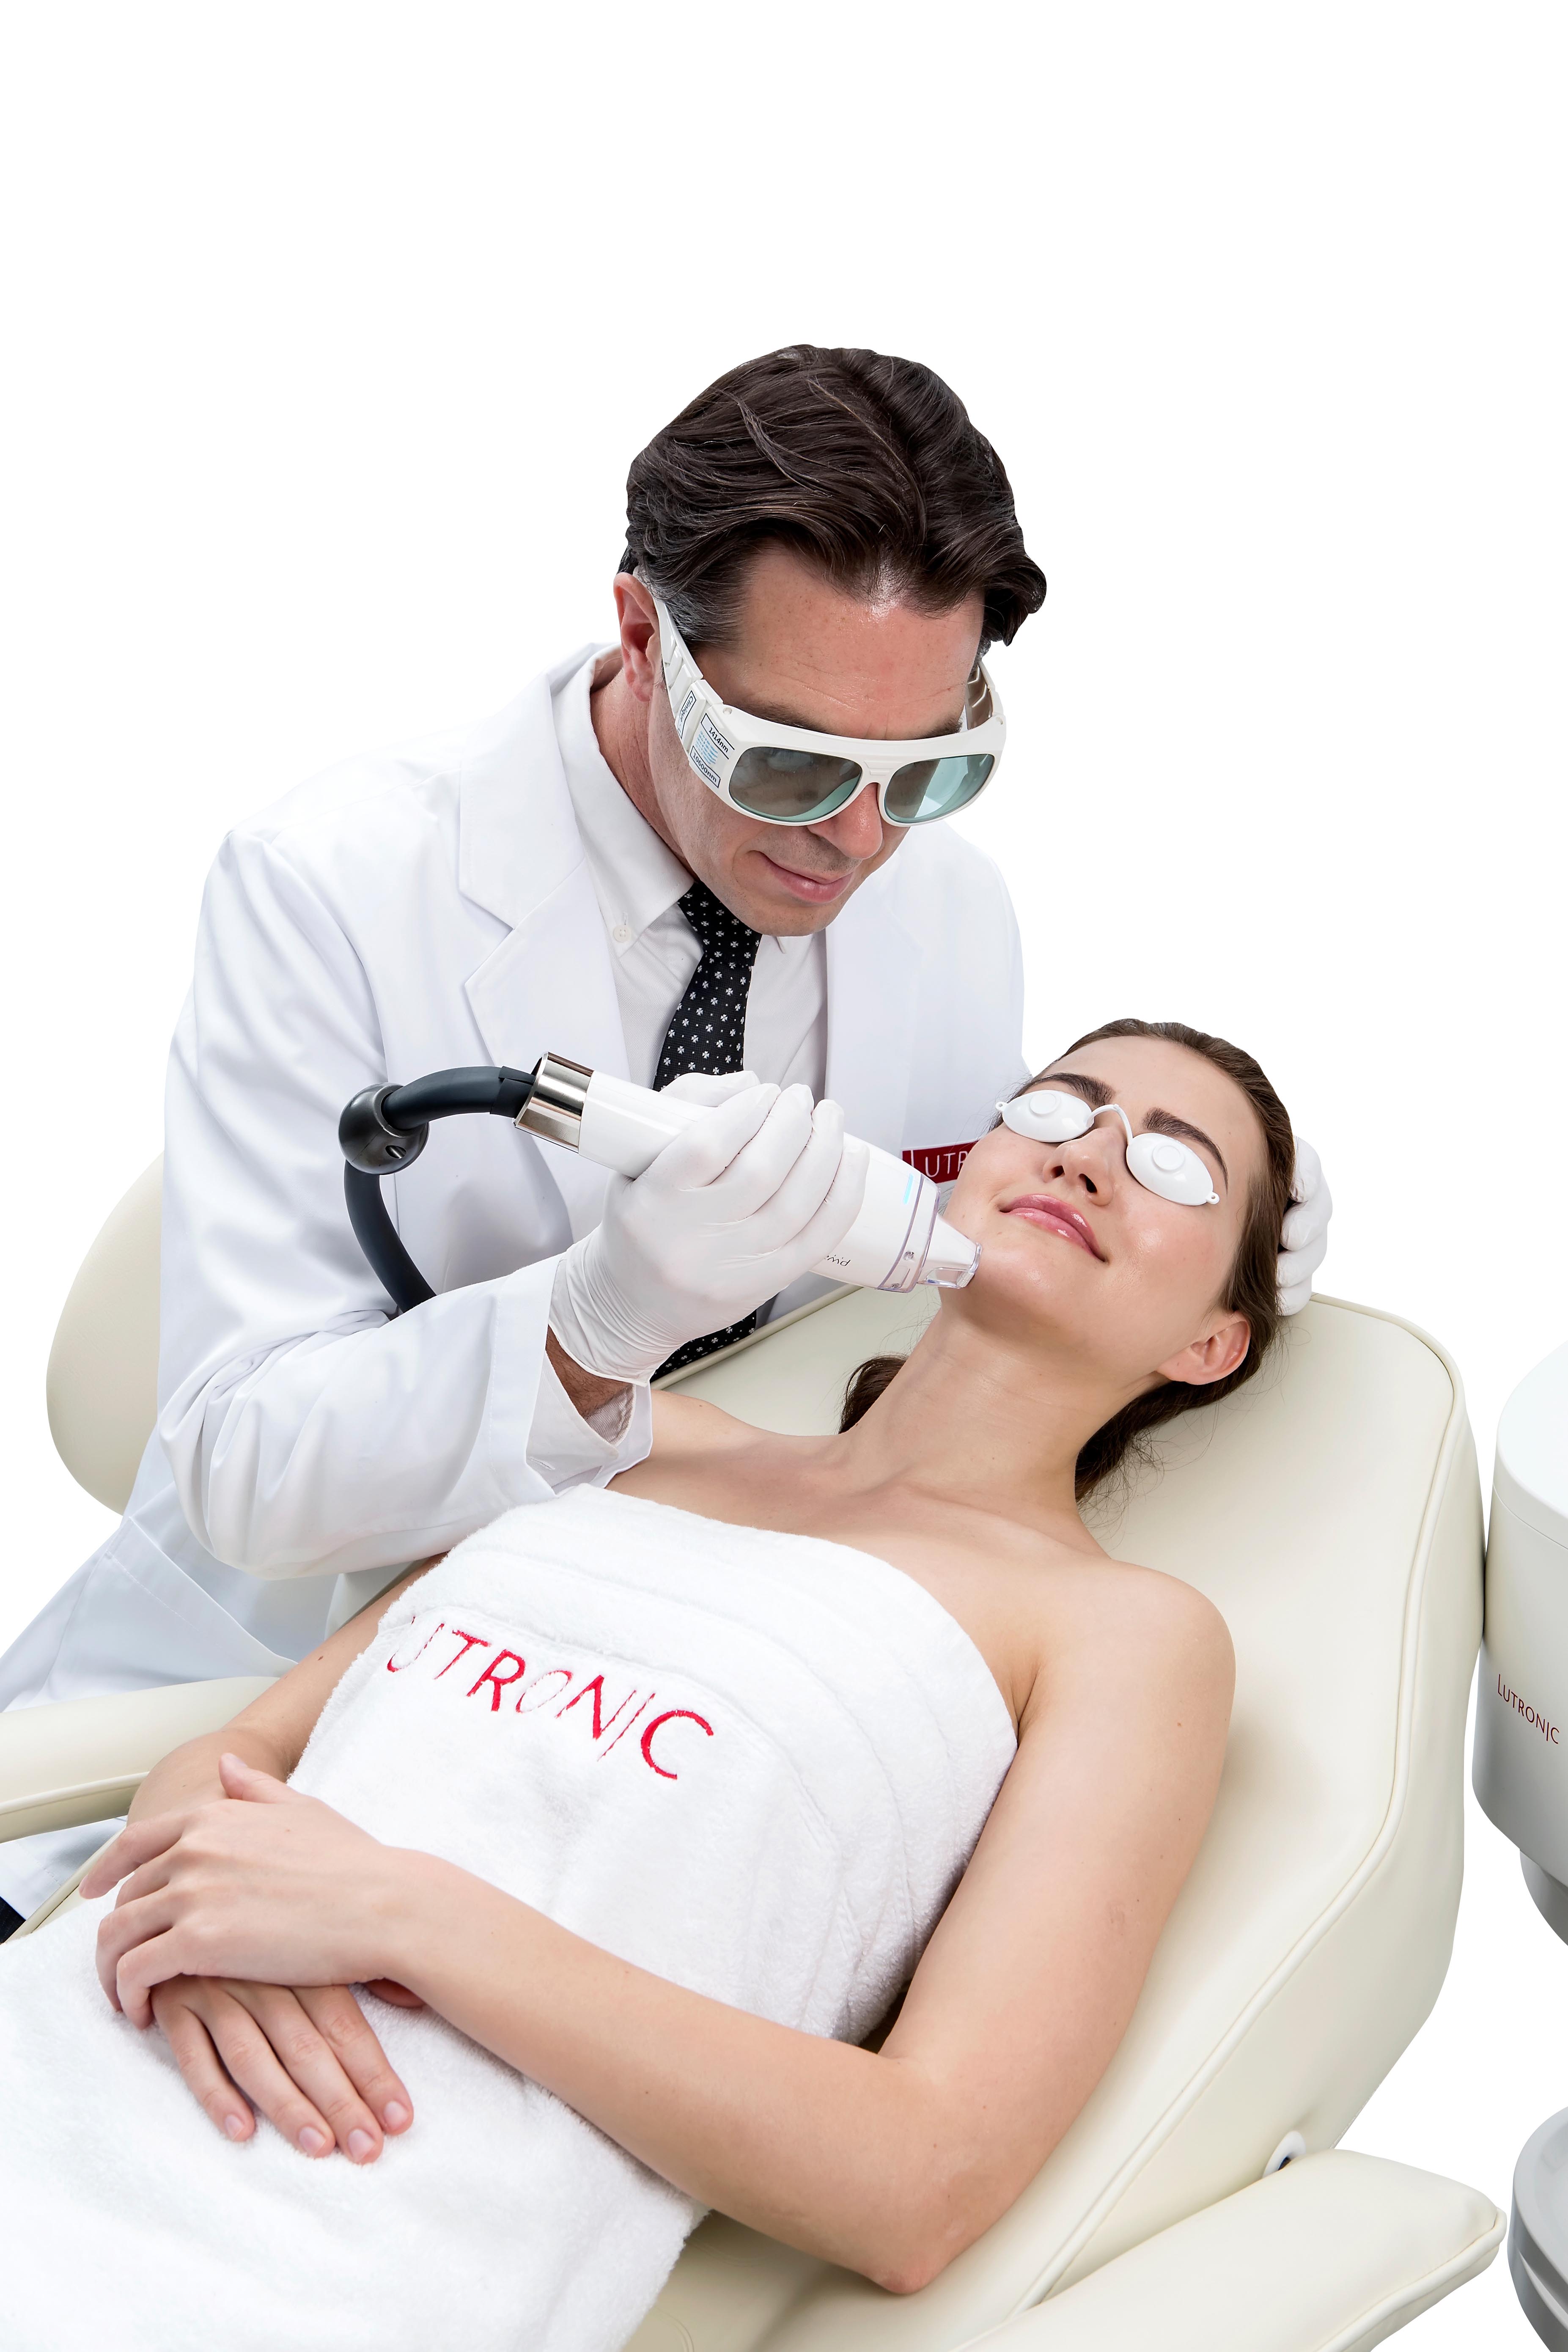 CRYSTAL Bright Laser Whitening System combines cosmetic surgery and pharmaceuticals to whiten darkened skin by using laser to pump nano-molecules of brightening serum deep into the skin.